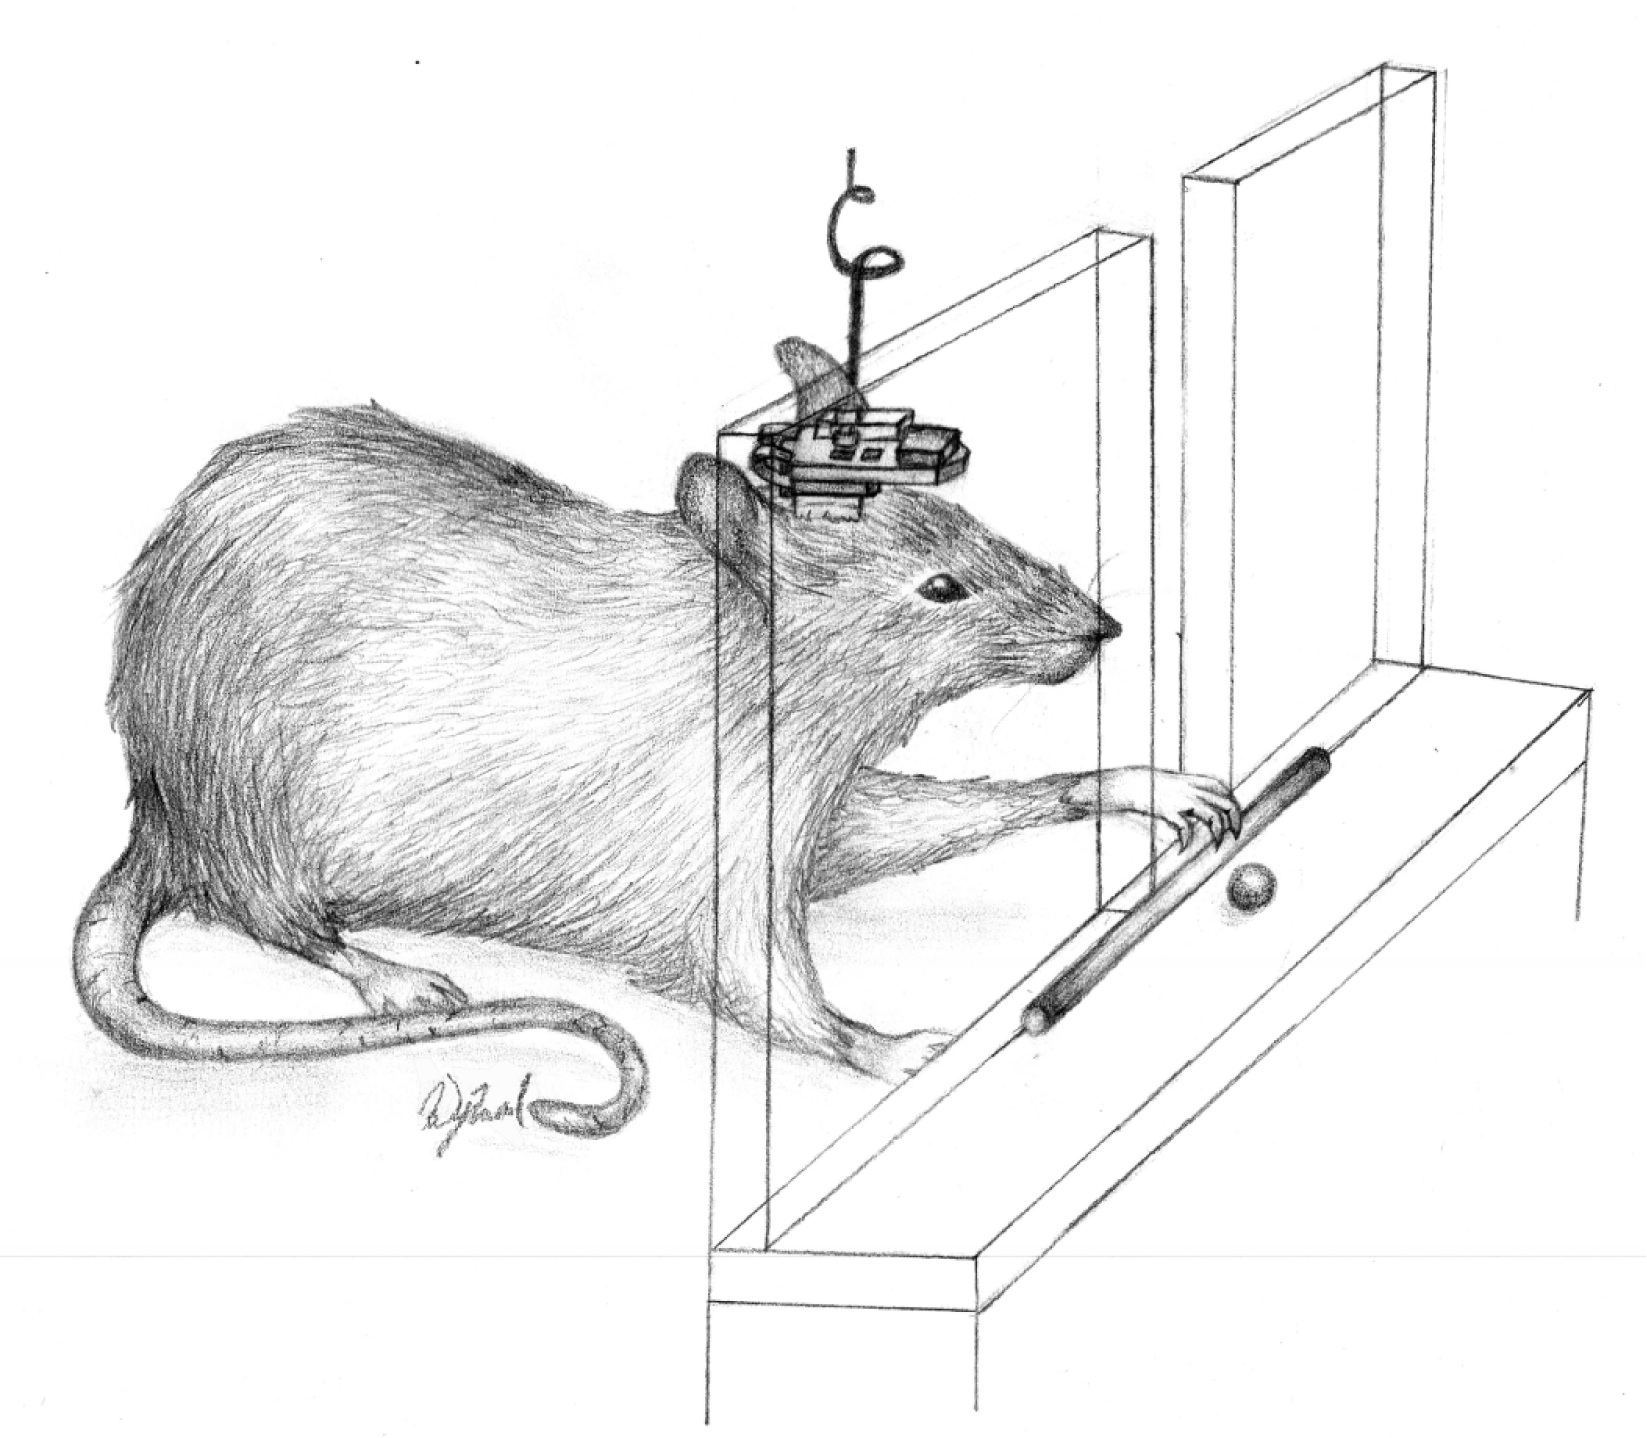 Rat with prostheses